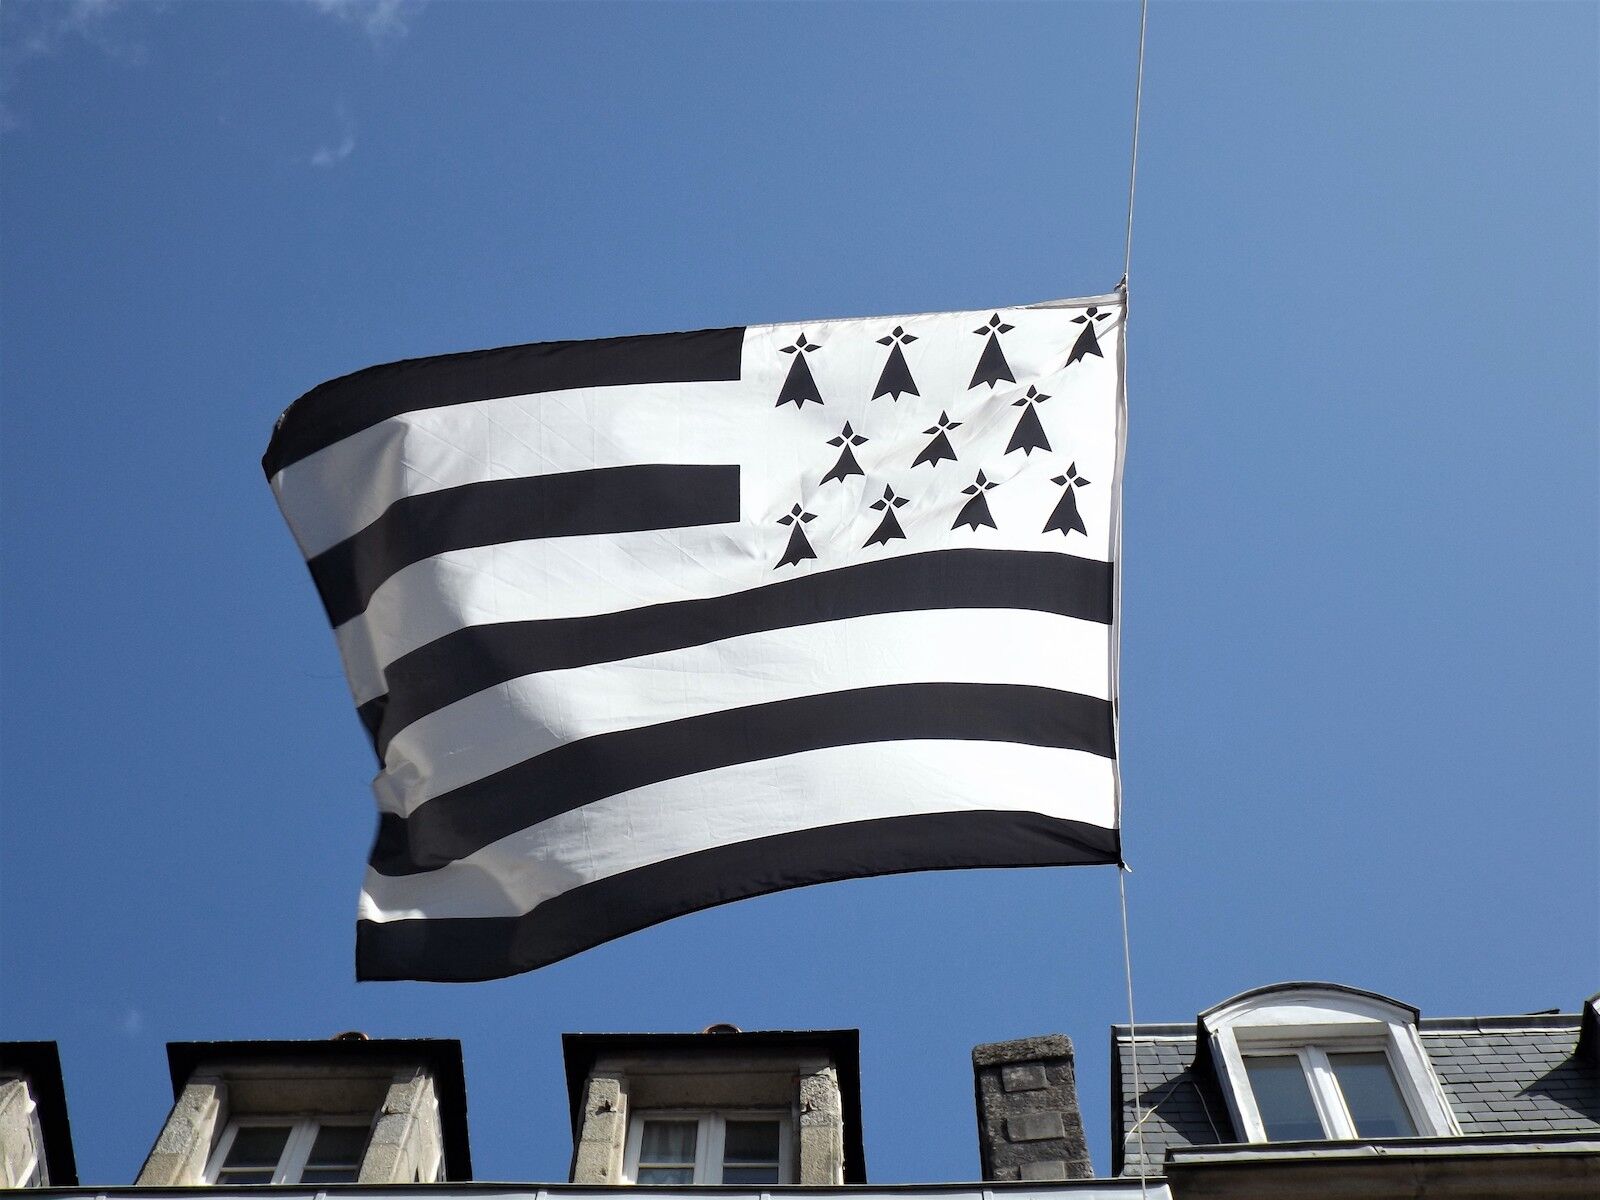 Celtic flags: Brittany. Brittany's flag is black and white with stripes